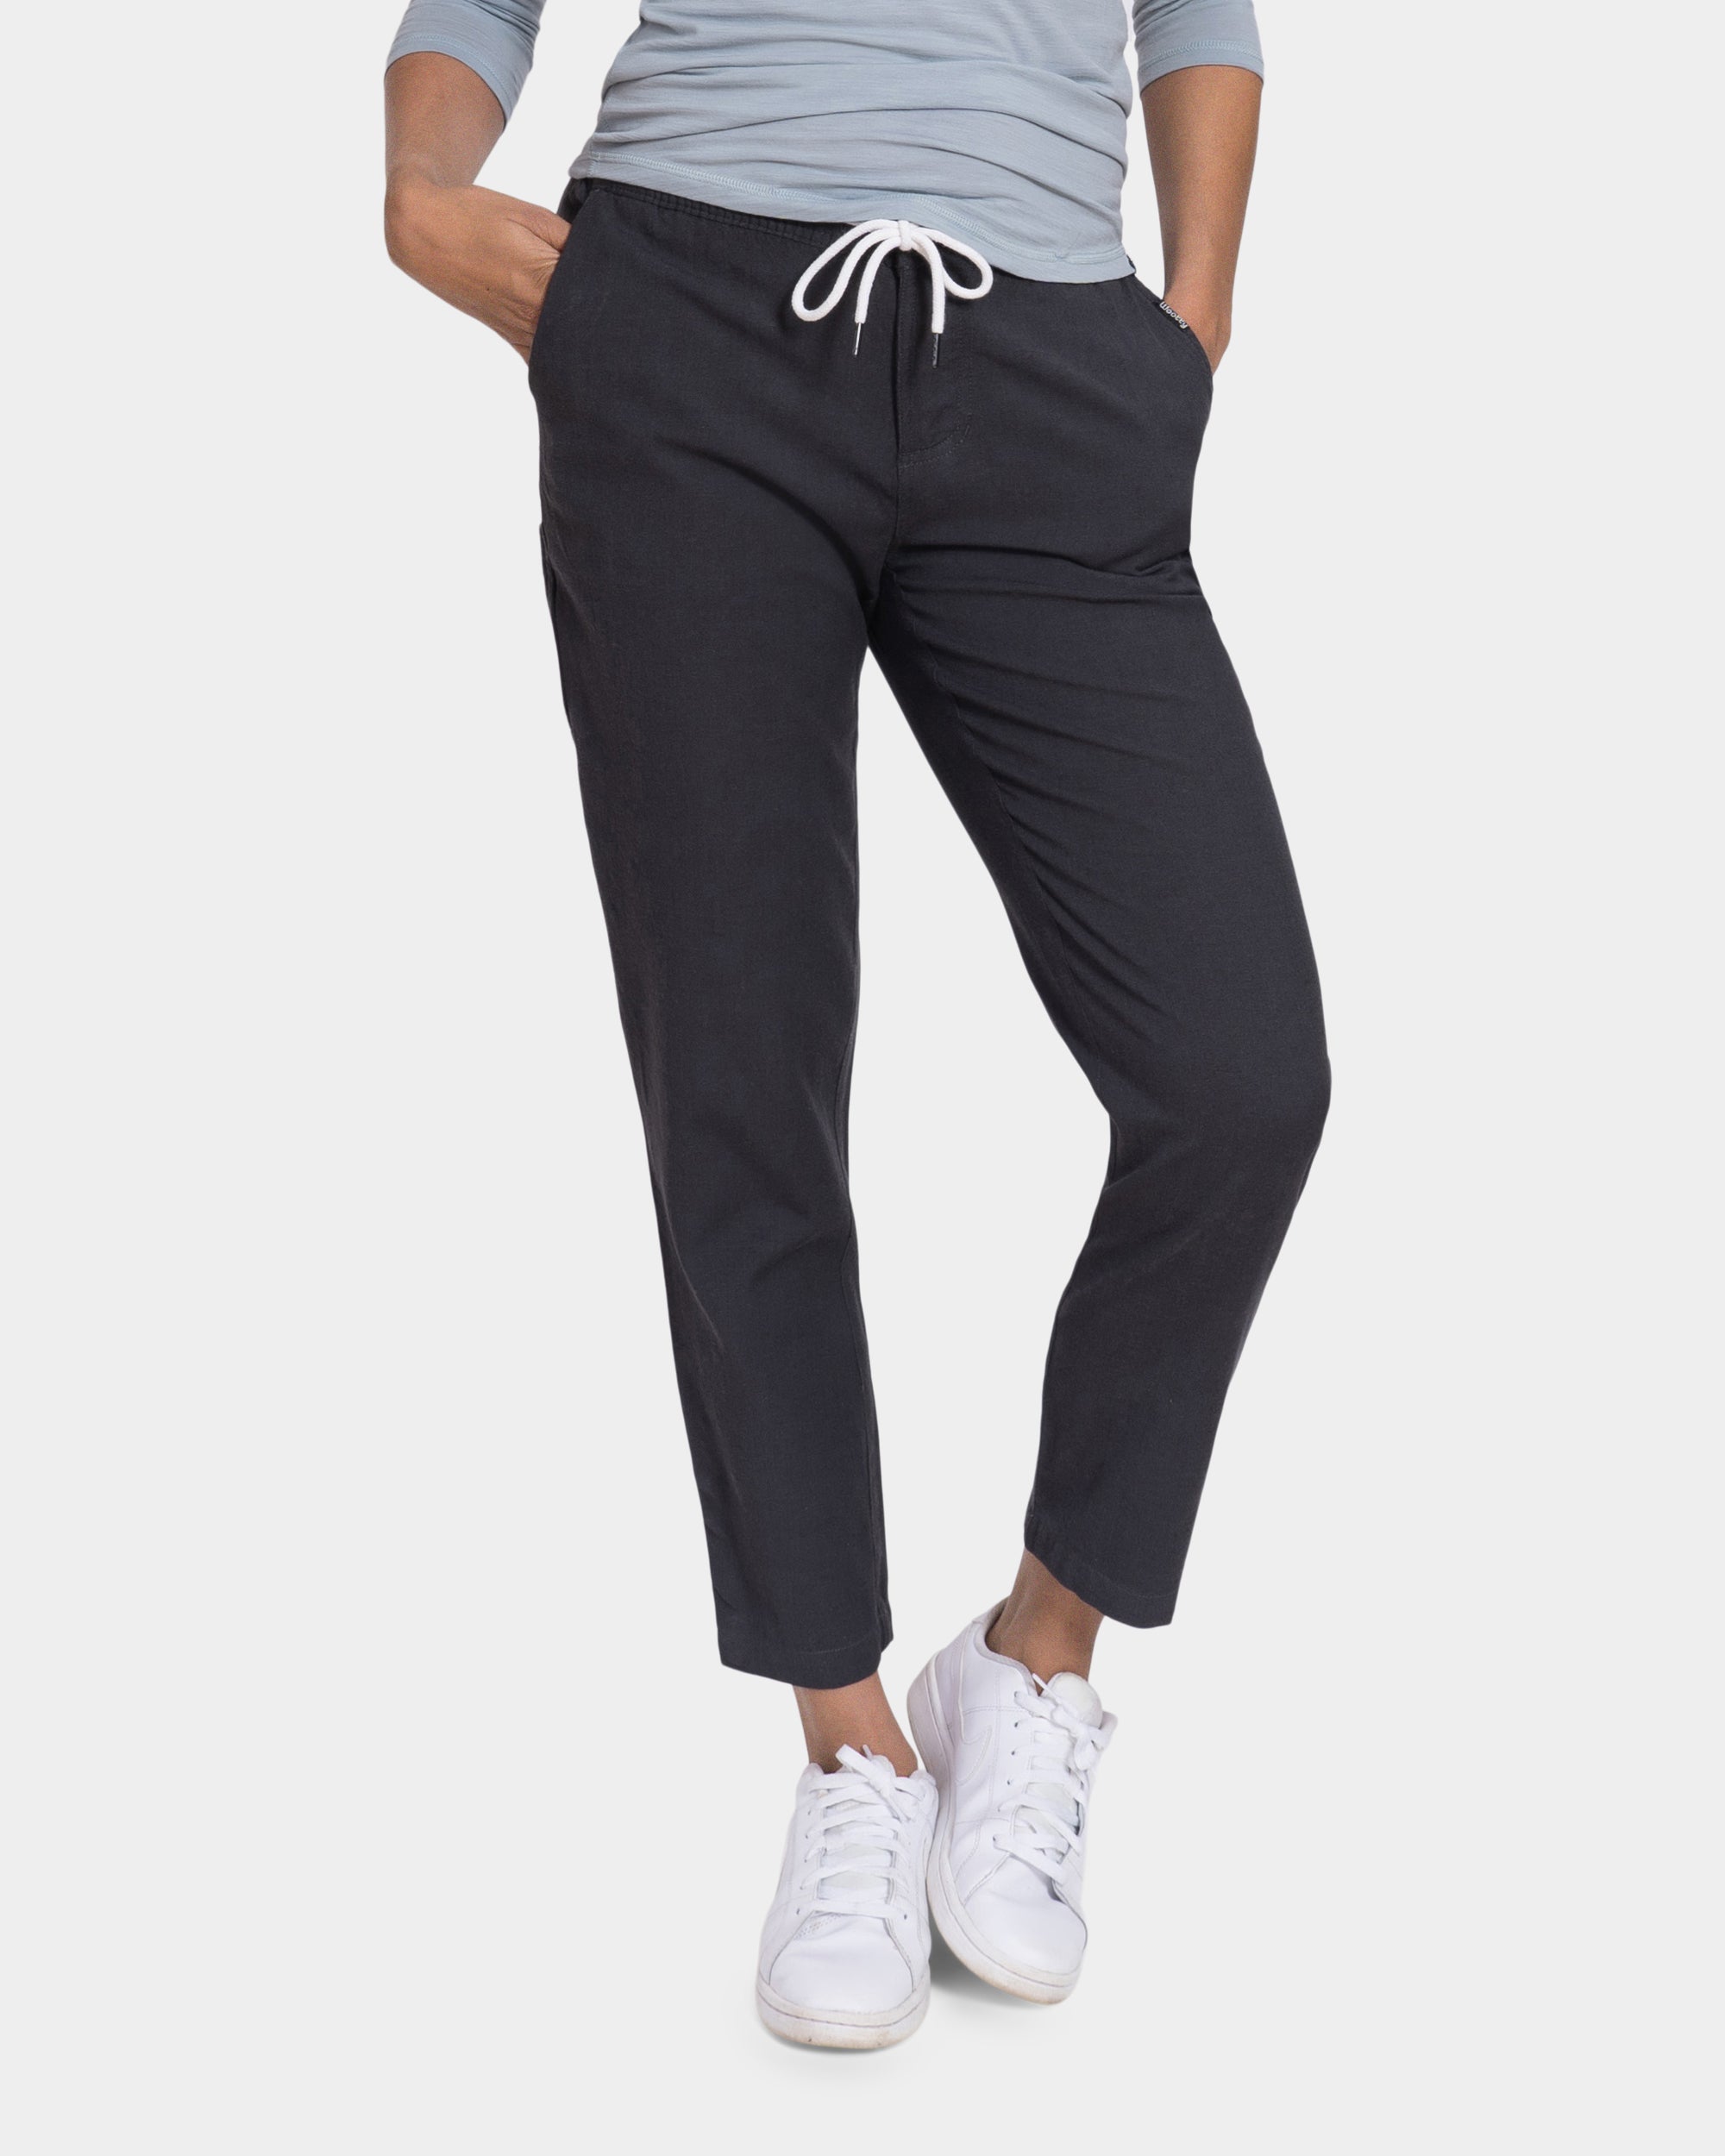 13 Pairs of Cozy Winter Pants from , Old Navy, Lululemon, and More